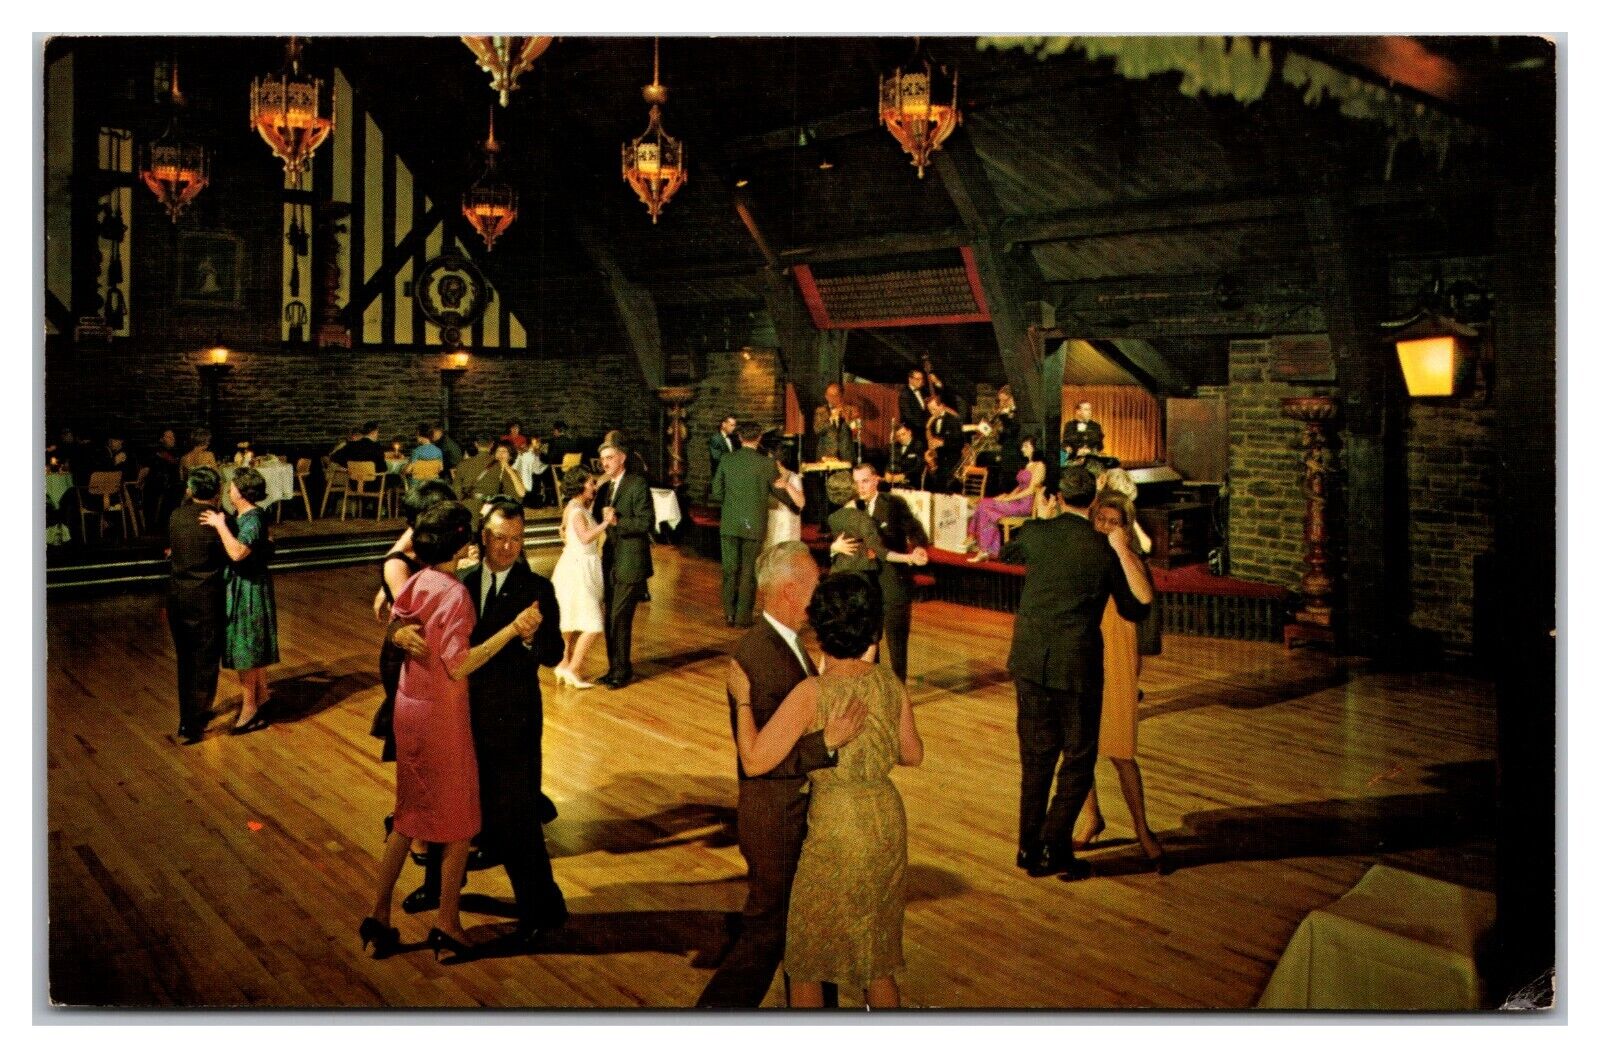 Dancing In The Old Mill, Toronto Ontario Postcard